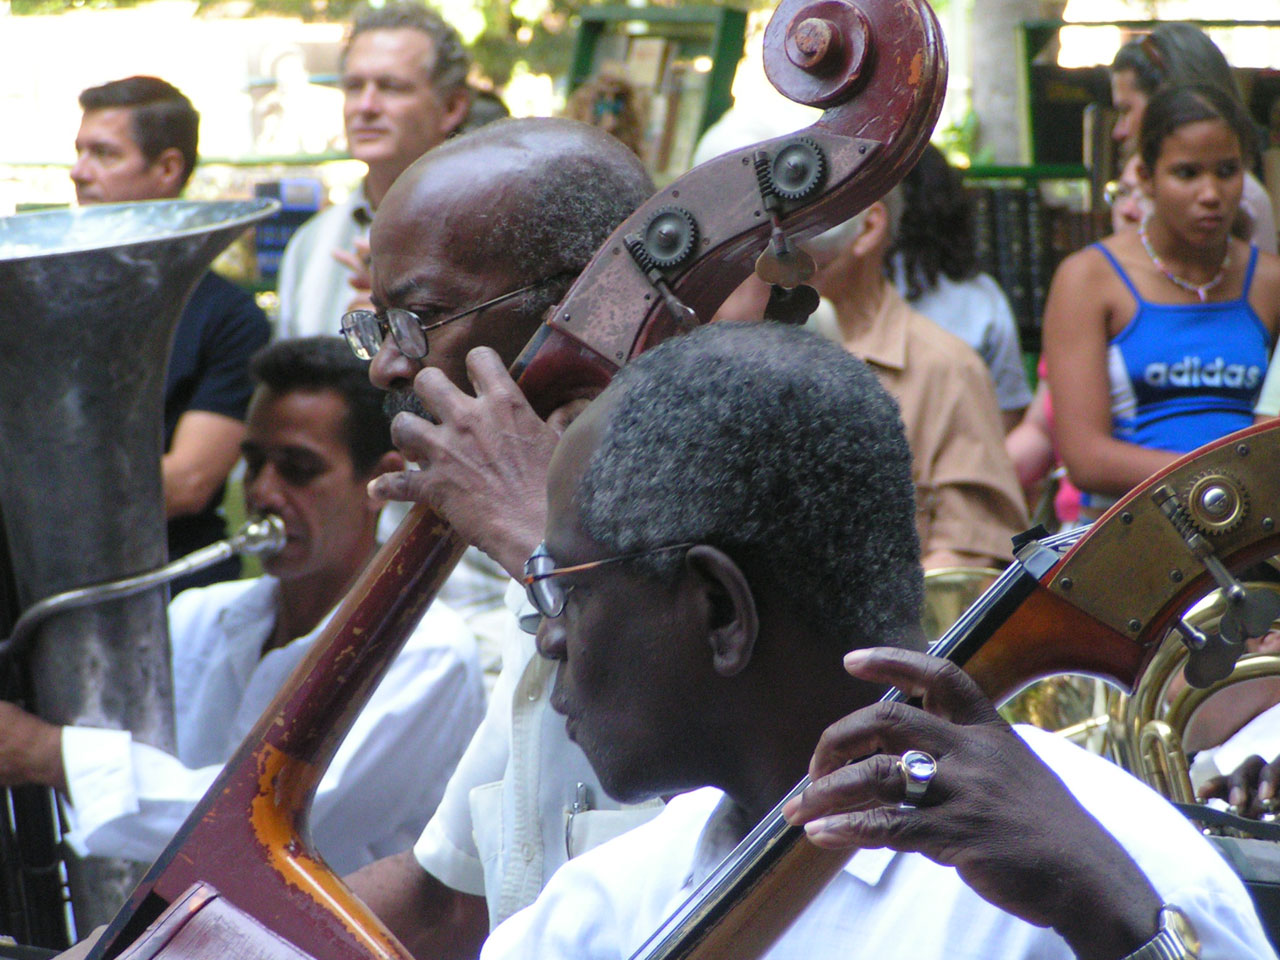 Concentrated at work, classic musicians in Habana 